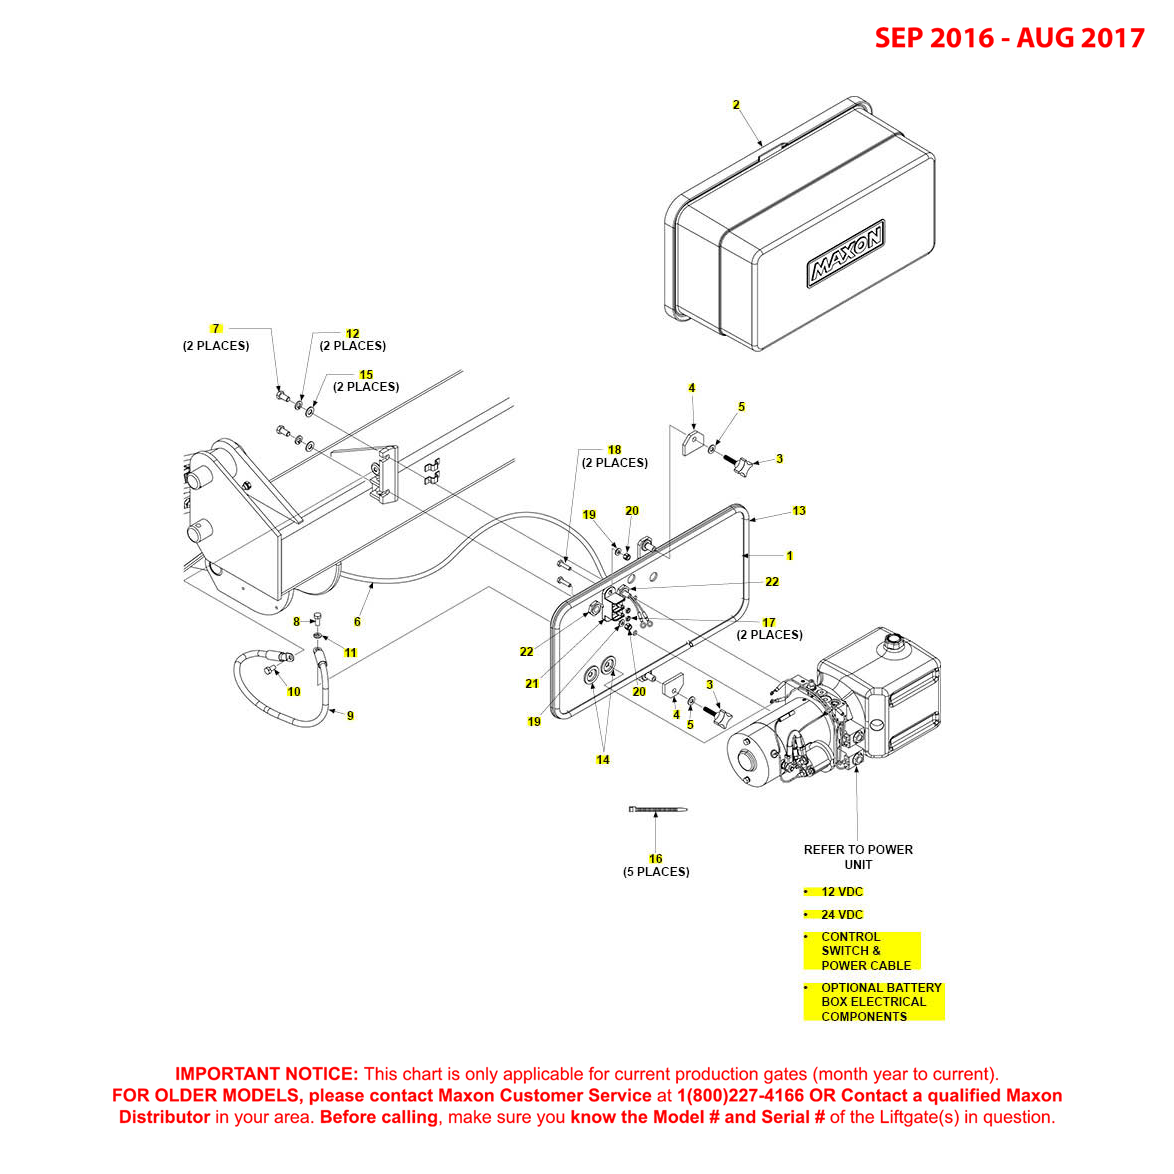 Maxon GPT (Sep 2016 - Aug 2017) Pump Cover And Mounting Plate Assembly Diagram